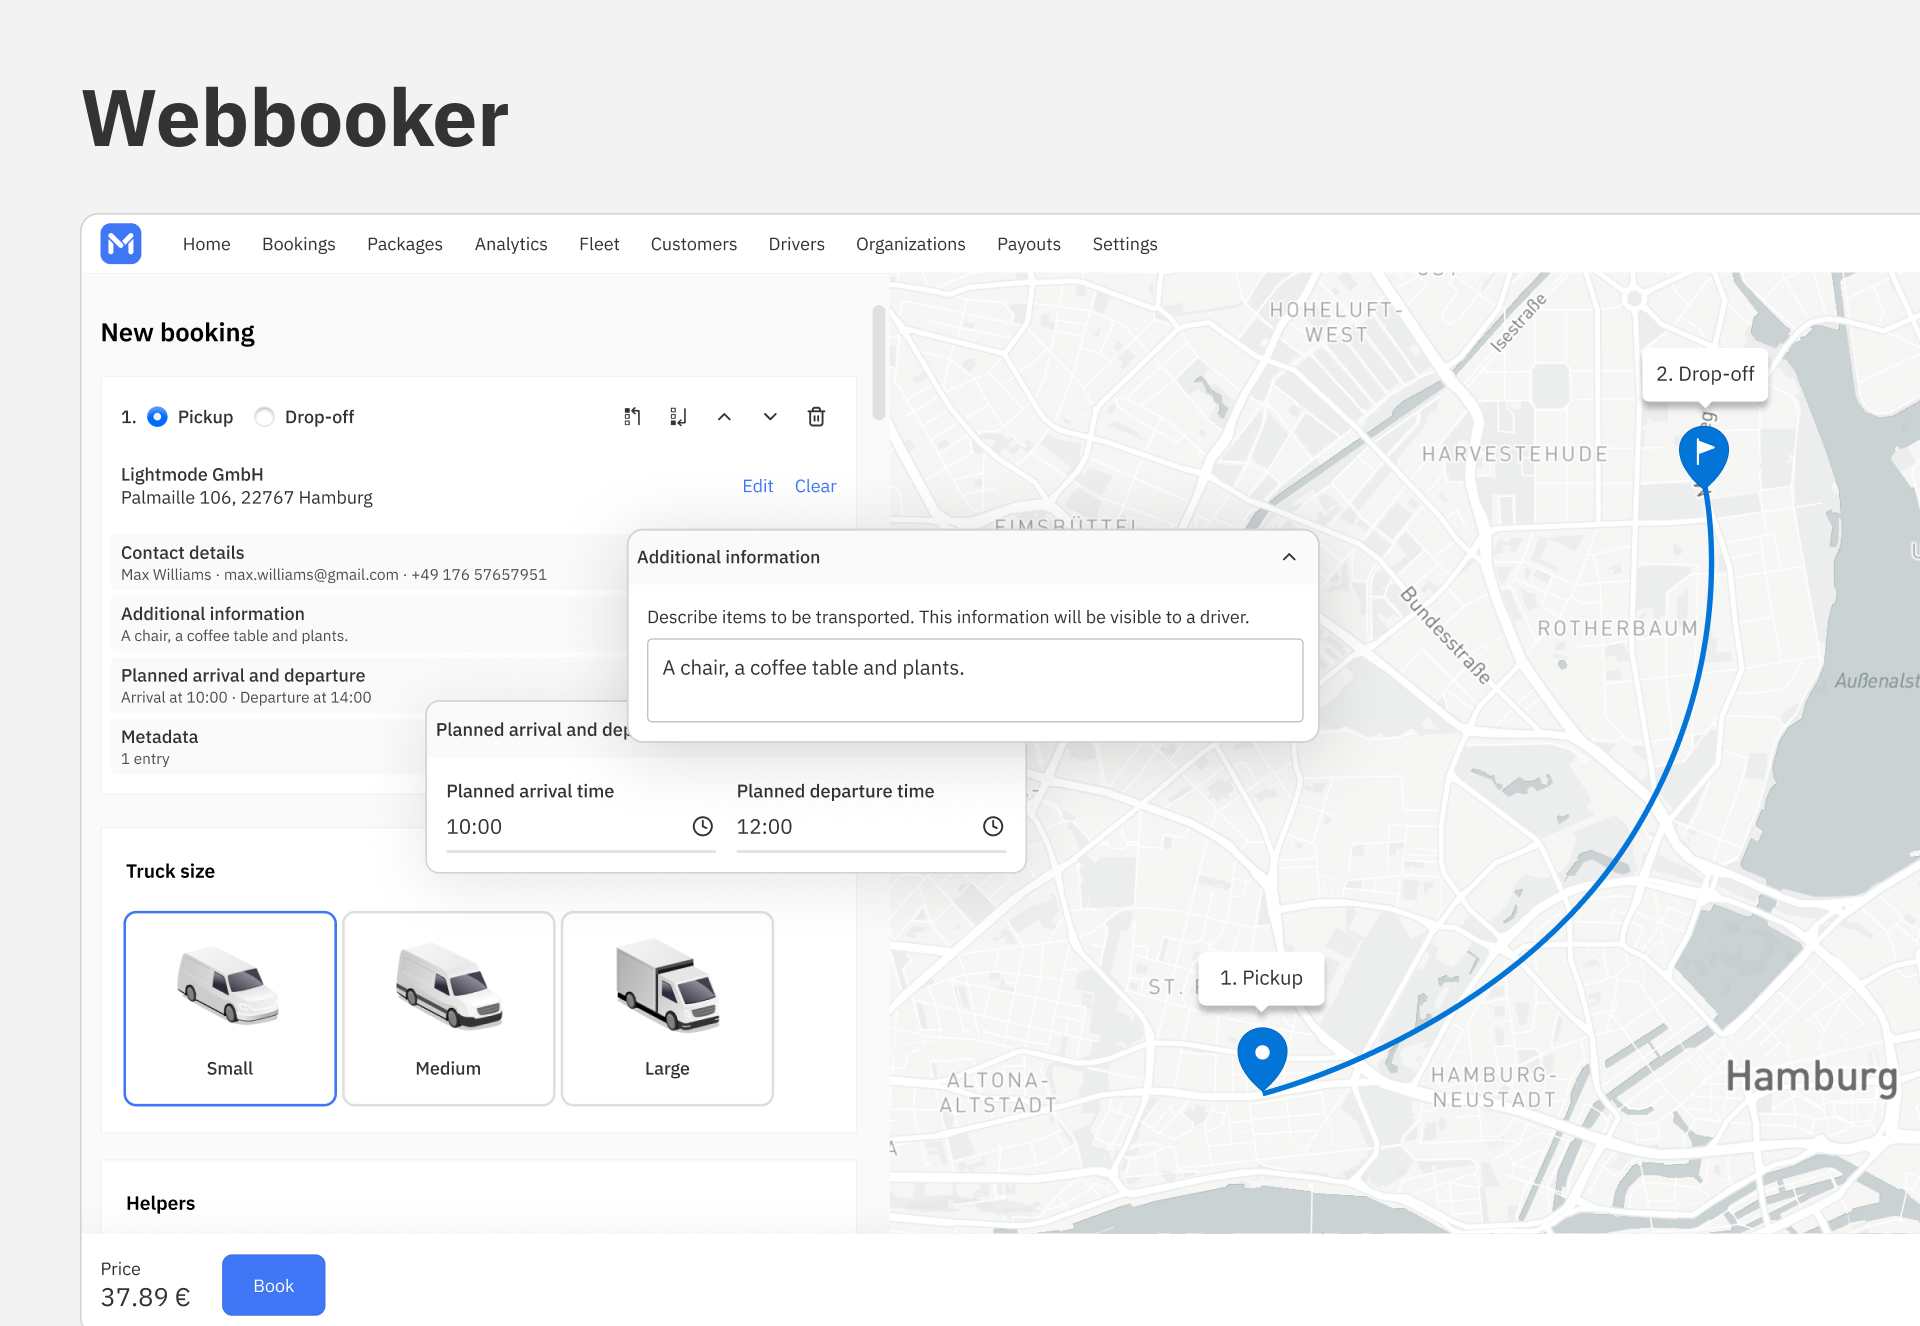 The Webbooker is a portal for customers to create and manage their bookings in a self-serving way.